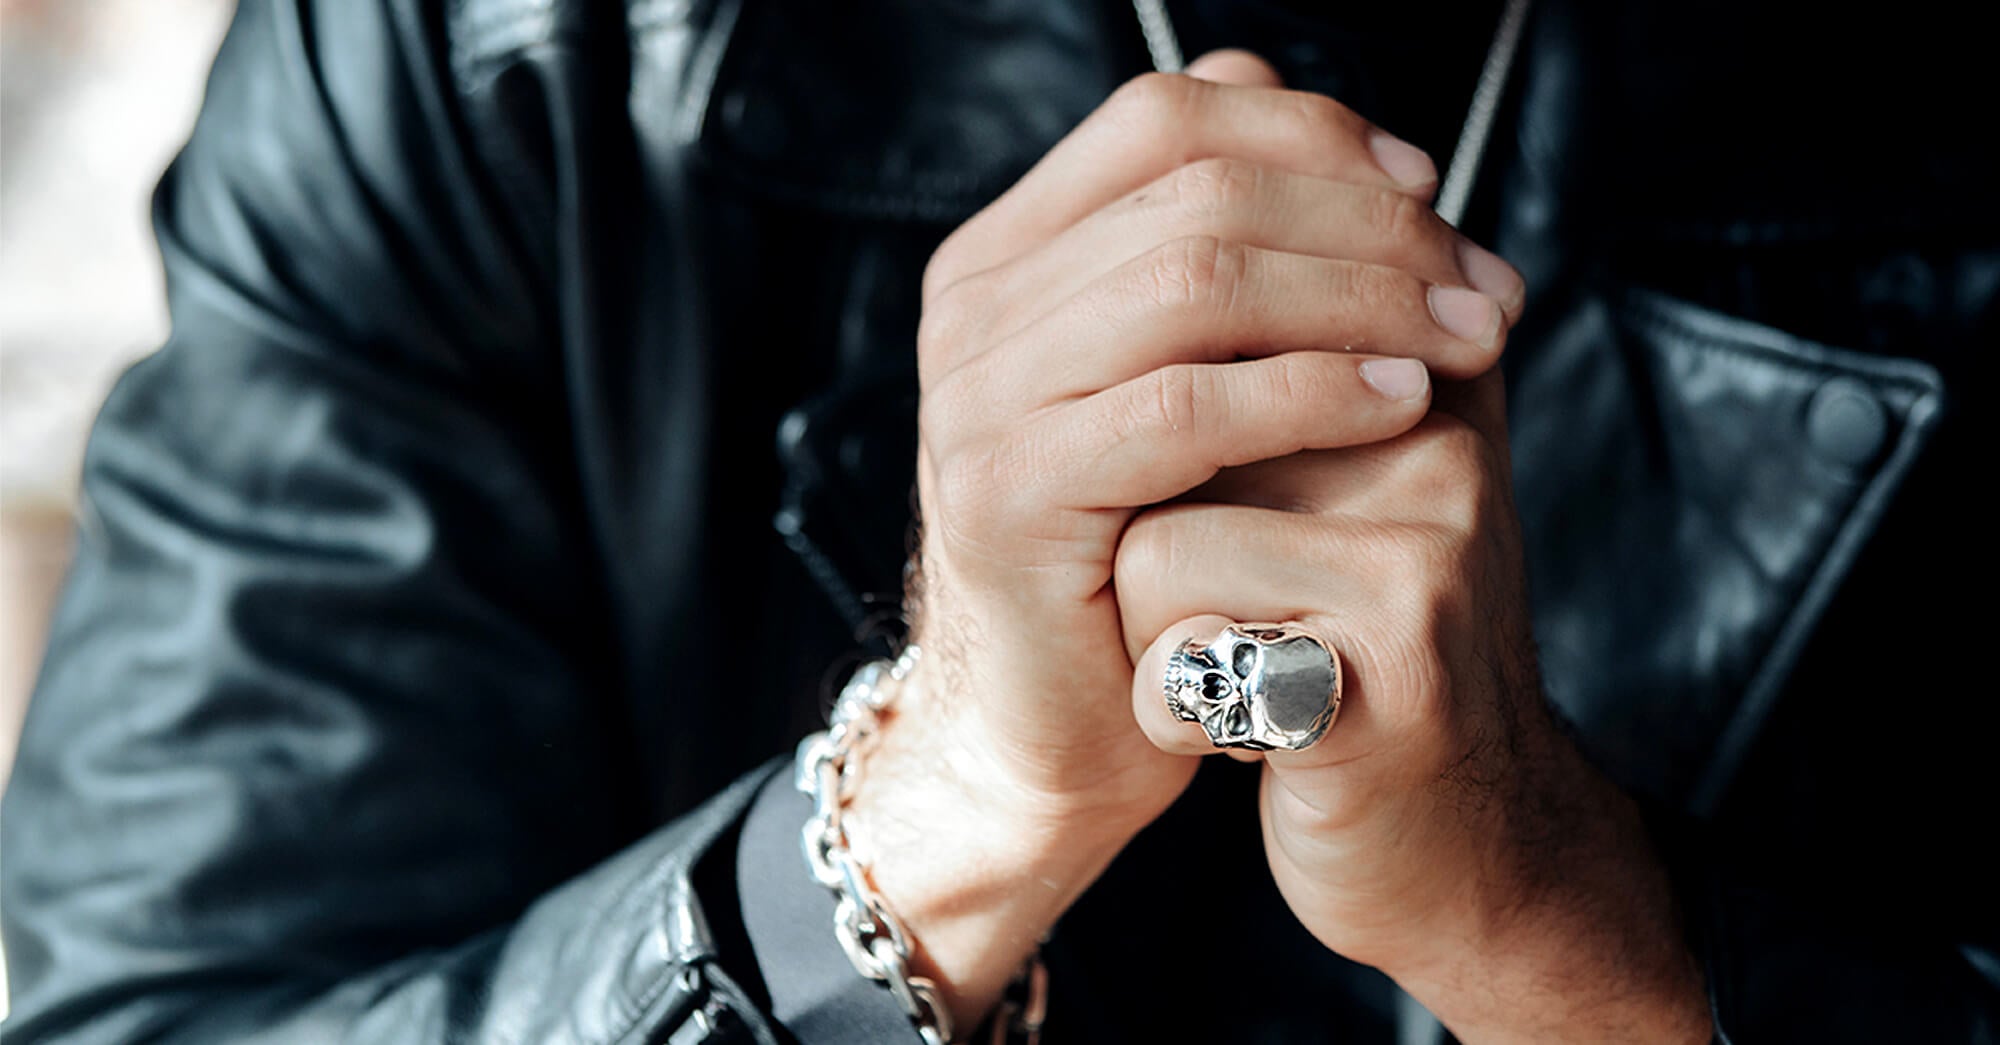 Man in leather jacket wearing a silver large skull ring